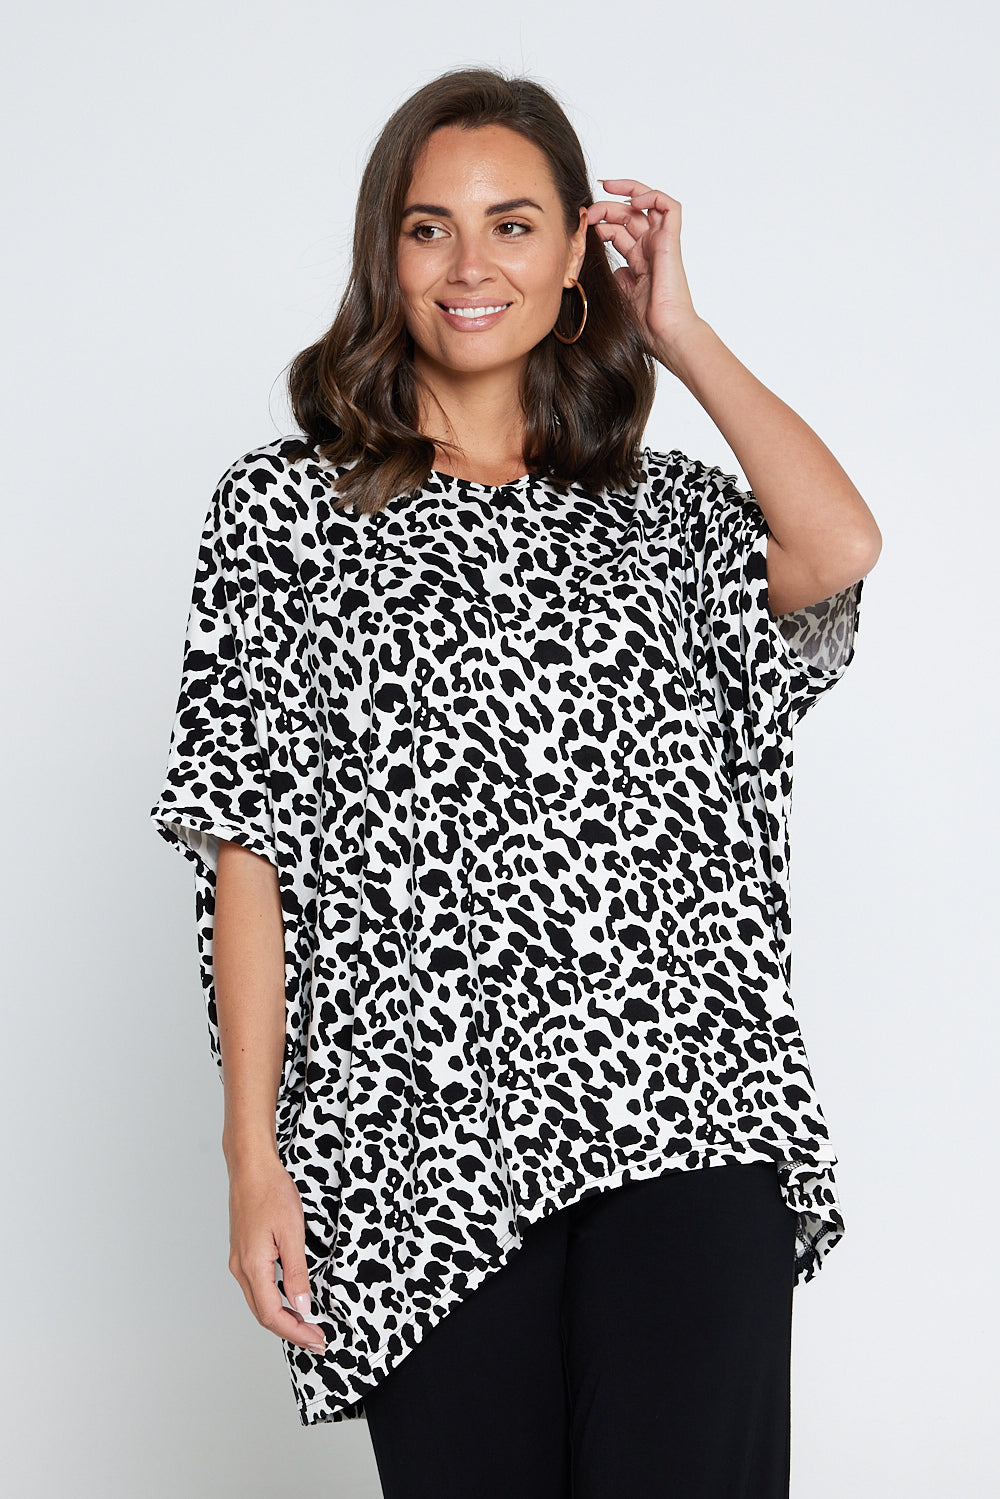 Claire Bamboo Top - Black/White Animal